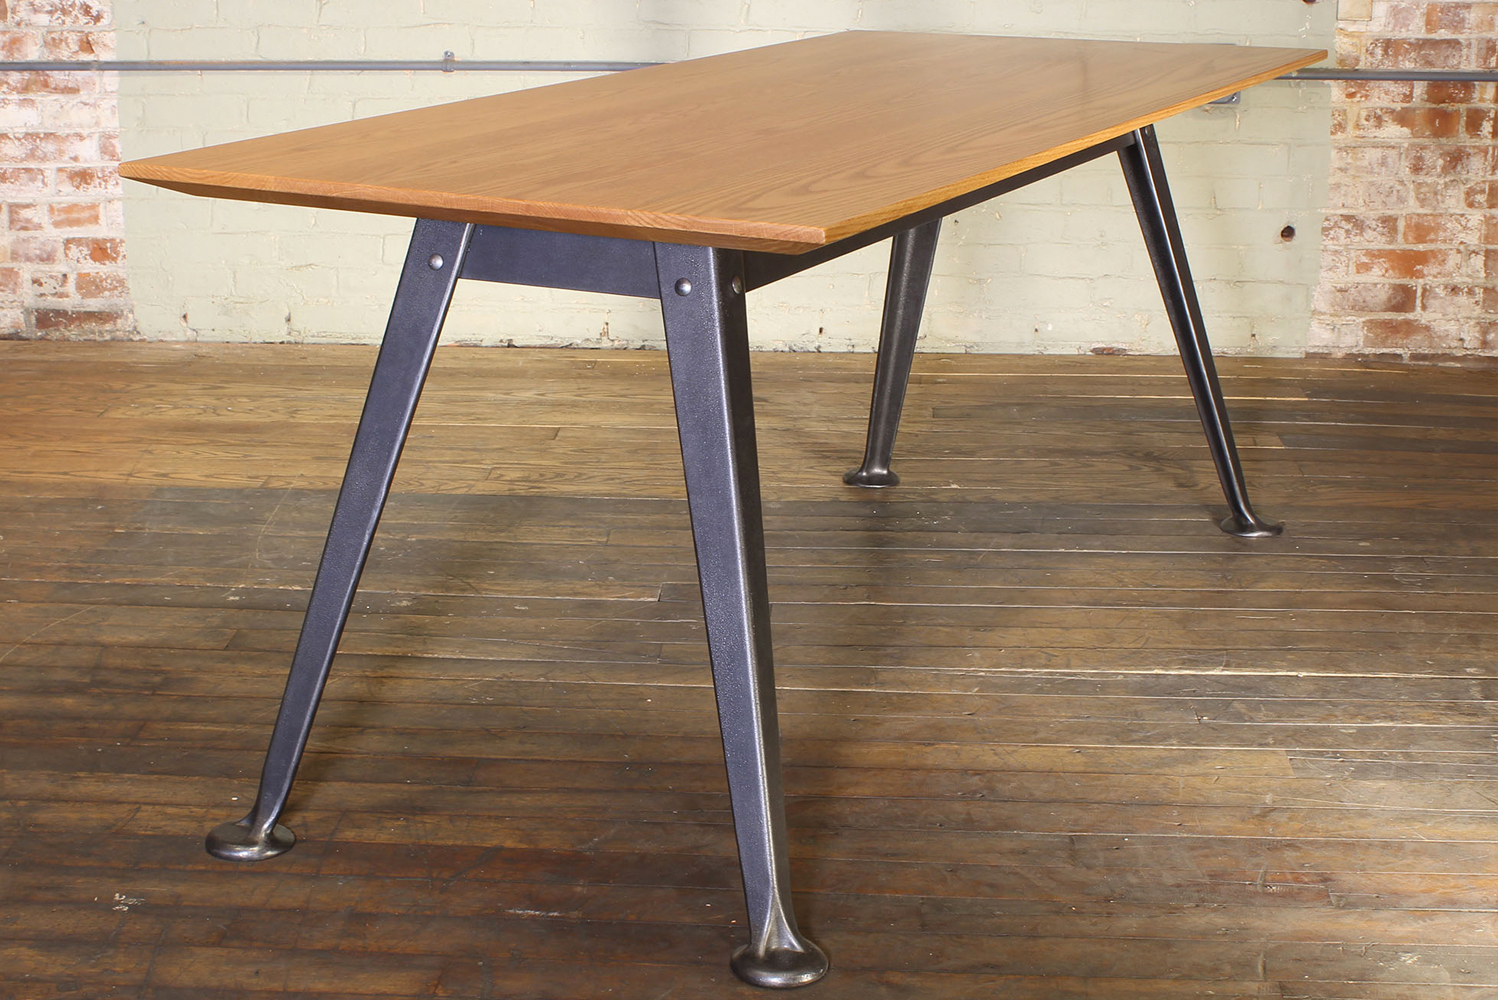 Introducing the Splay-leg table which is part of the Originals collection by Get Back 